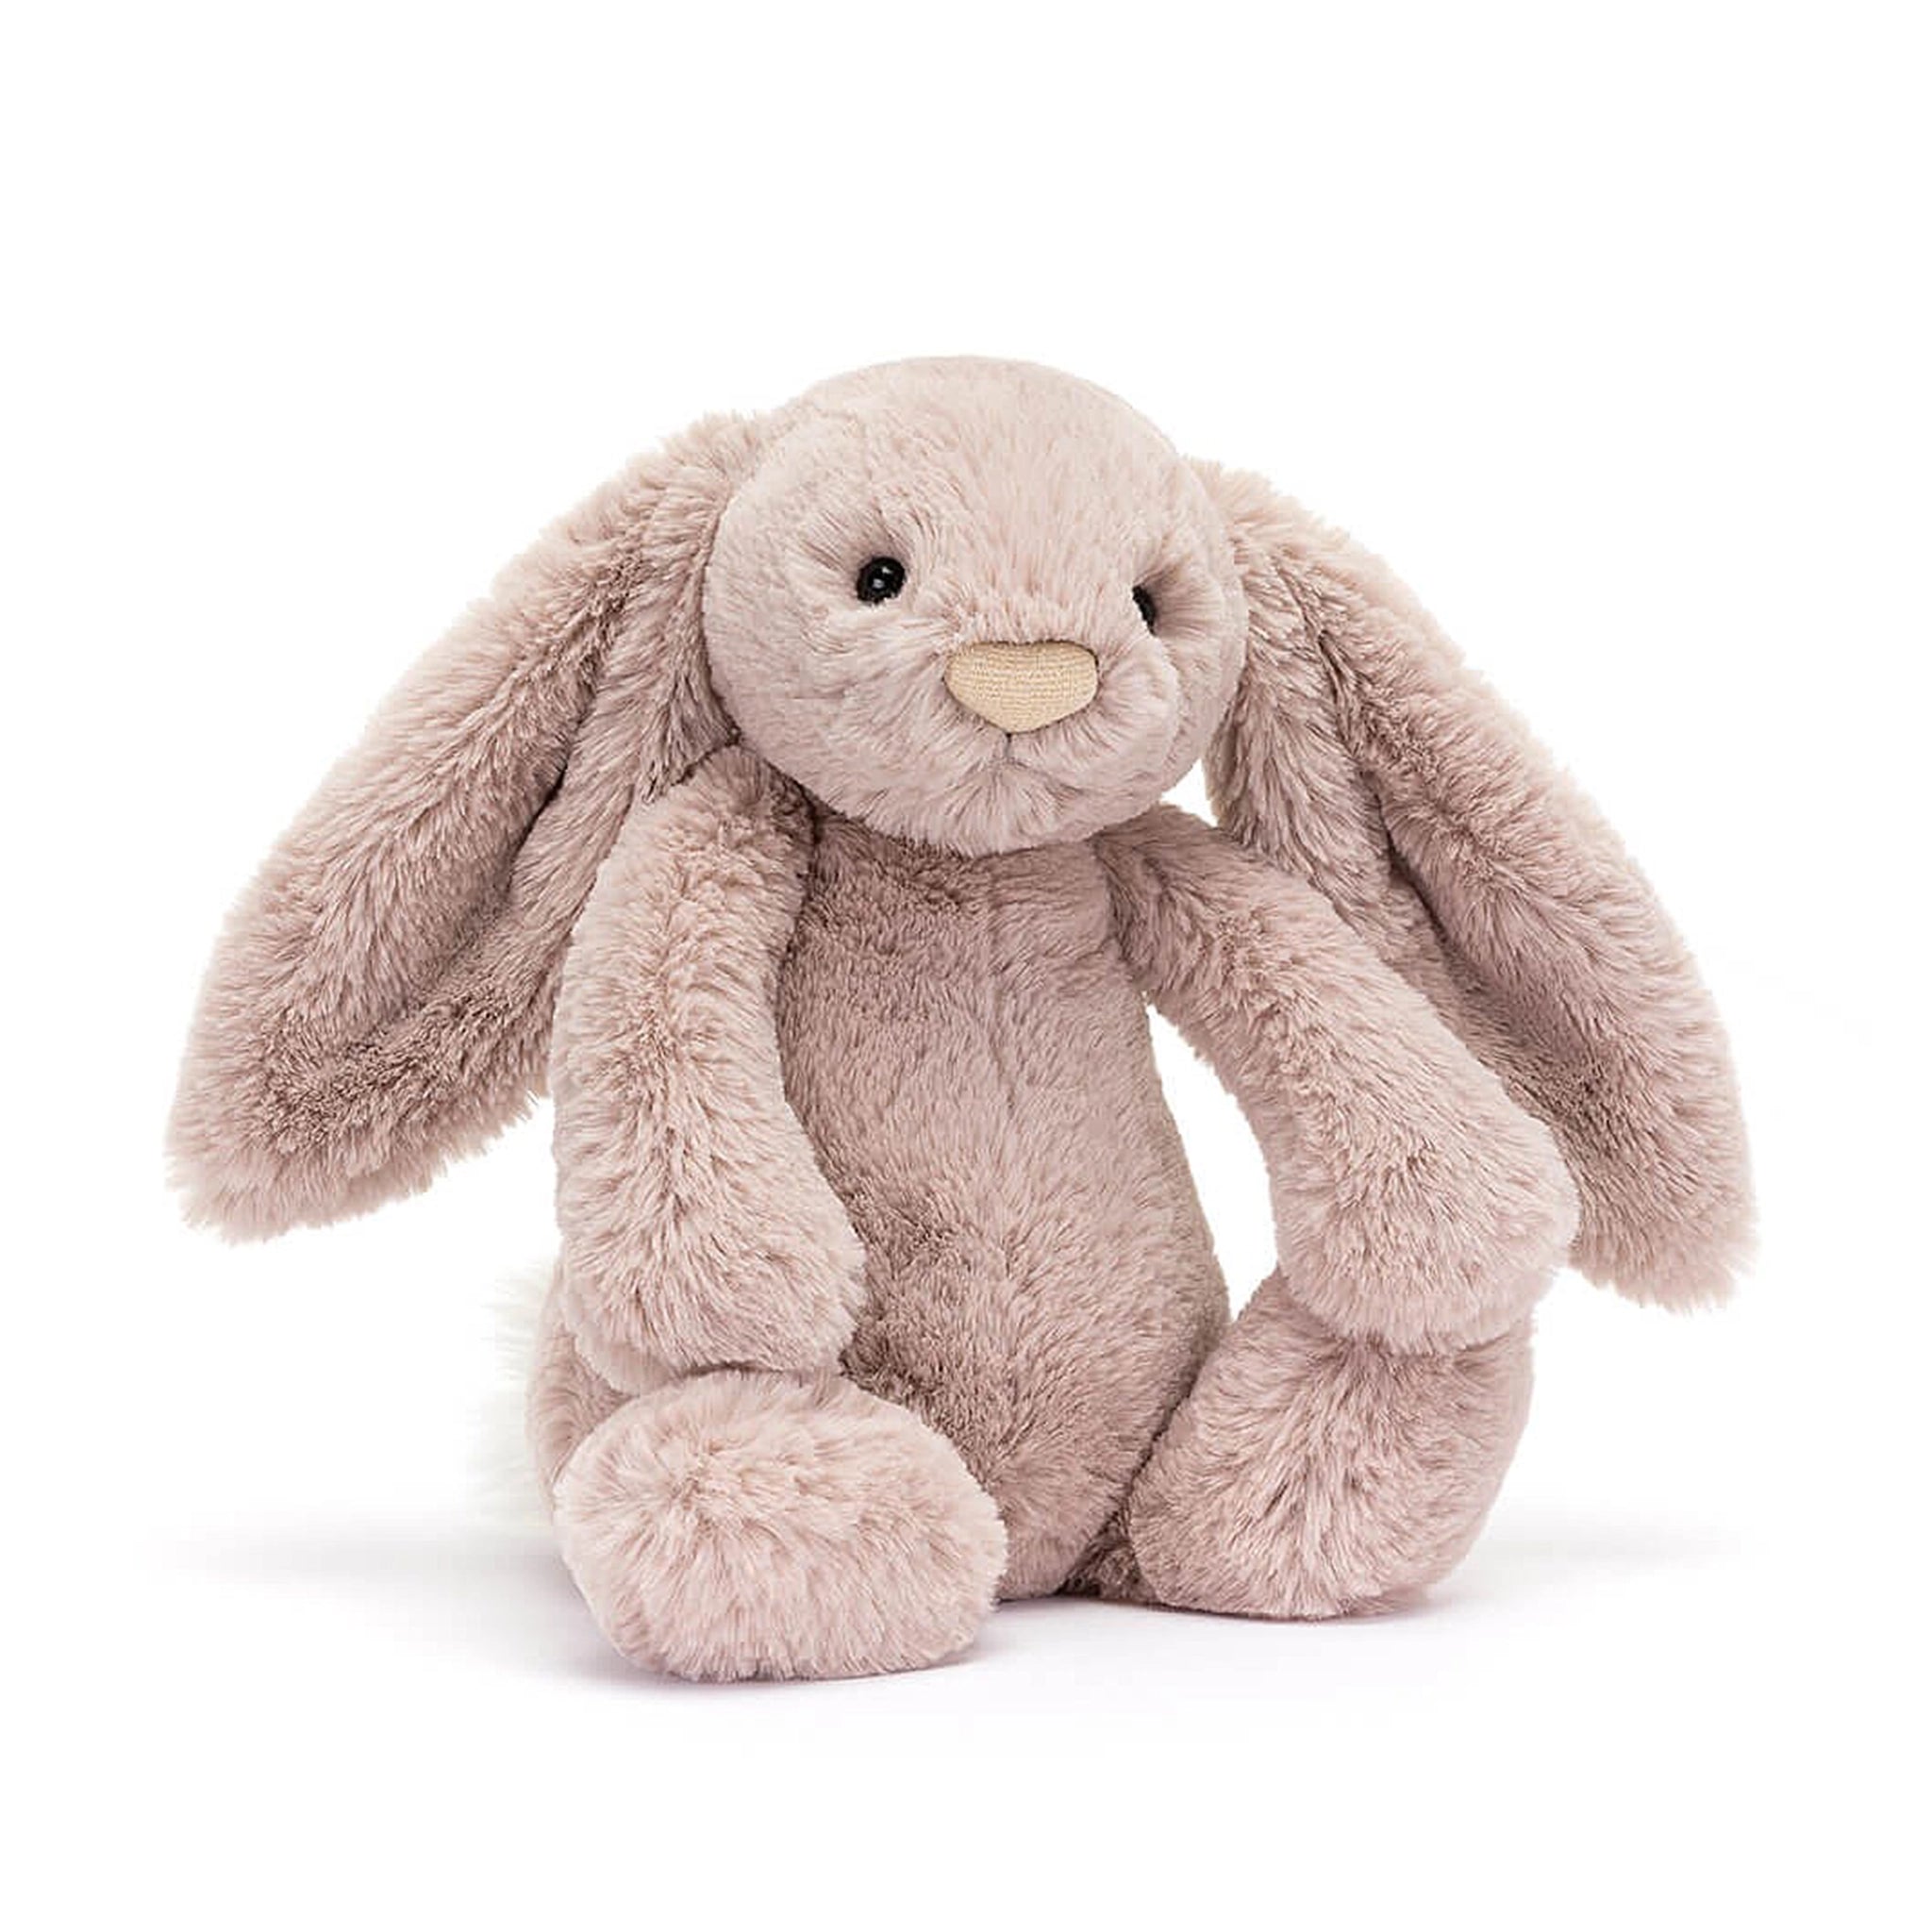 On a white background is a light pink stuffed animal bunny with long floppy ears and super soft faux fur. 